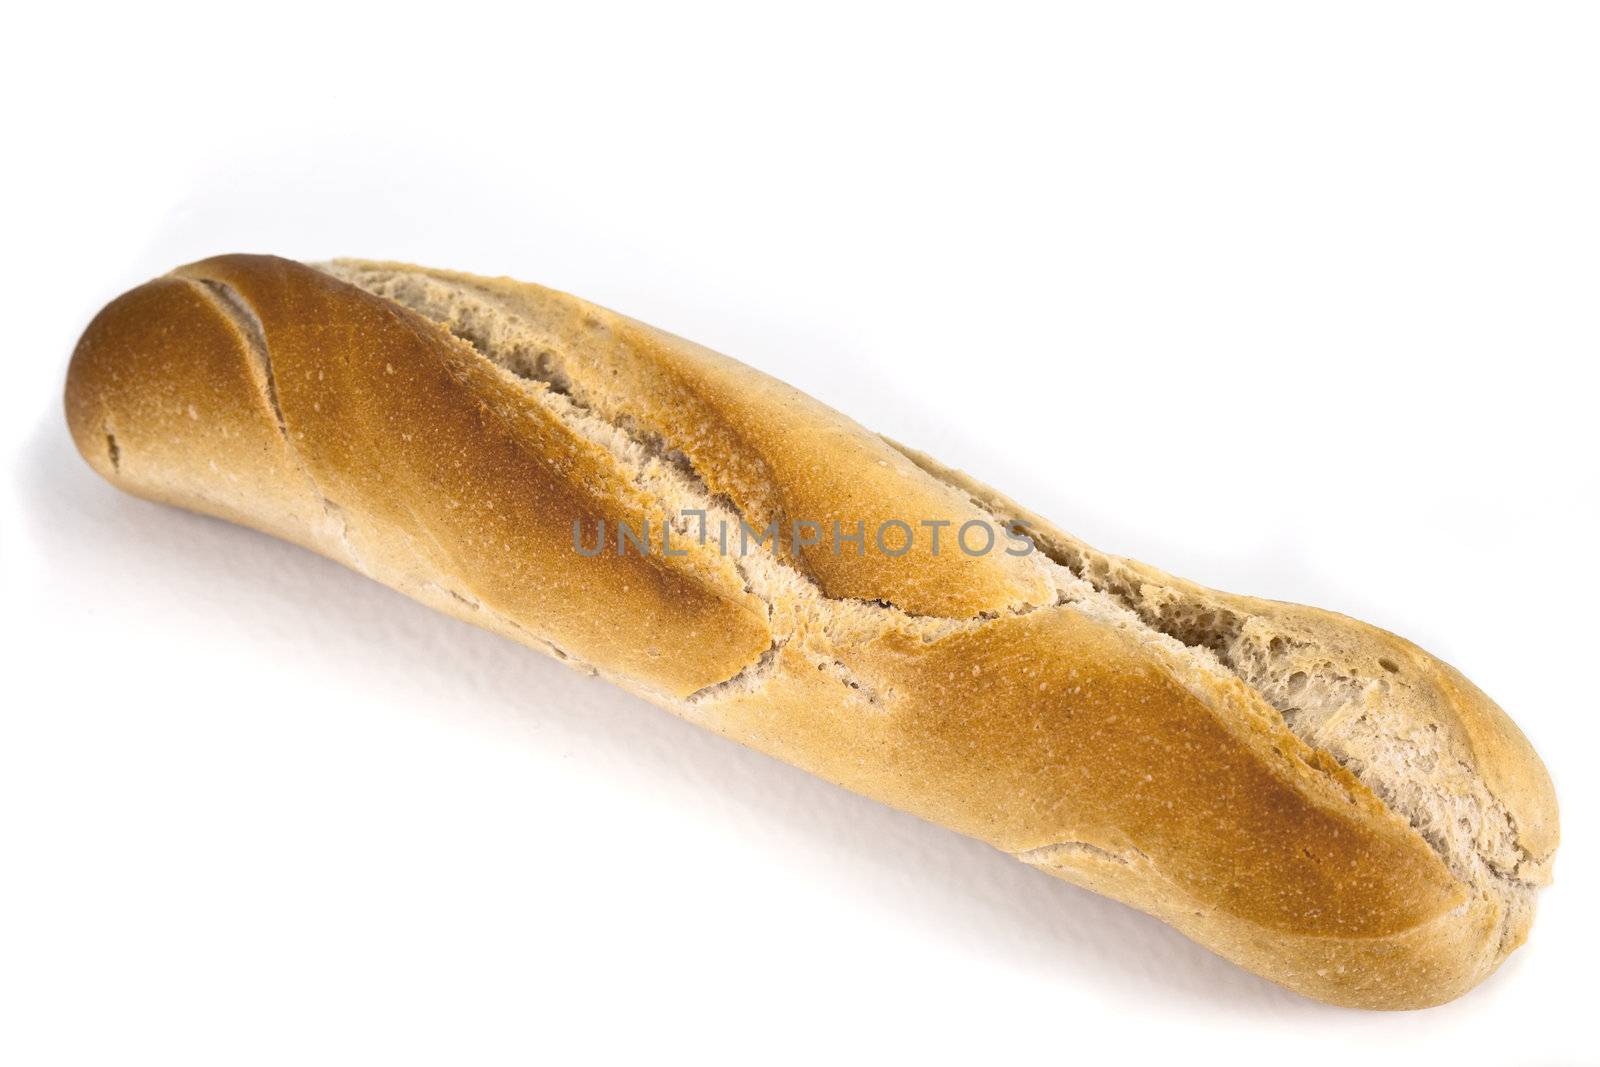 A stick of French Bread